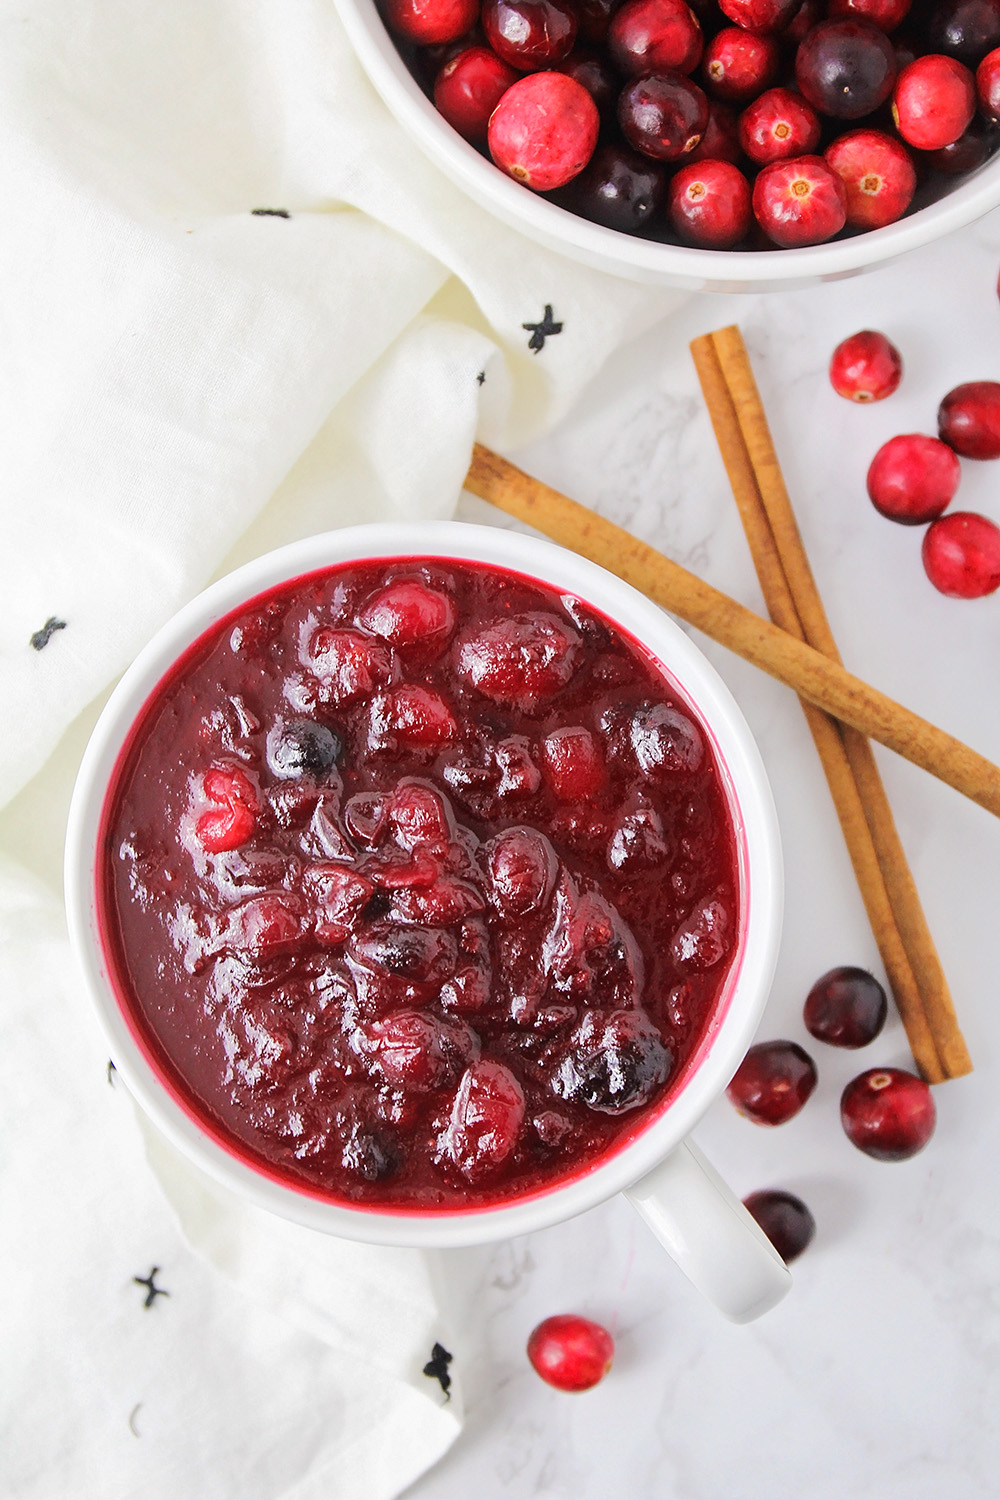 Homemade cranberry sauce - so delicious and way better than the canned stuff!